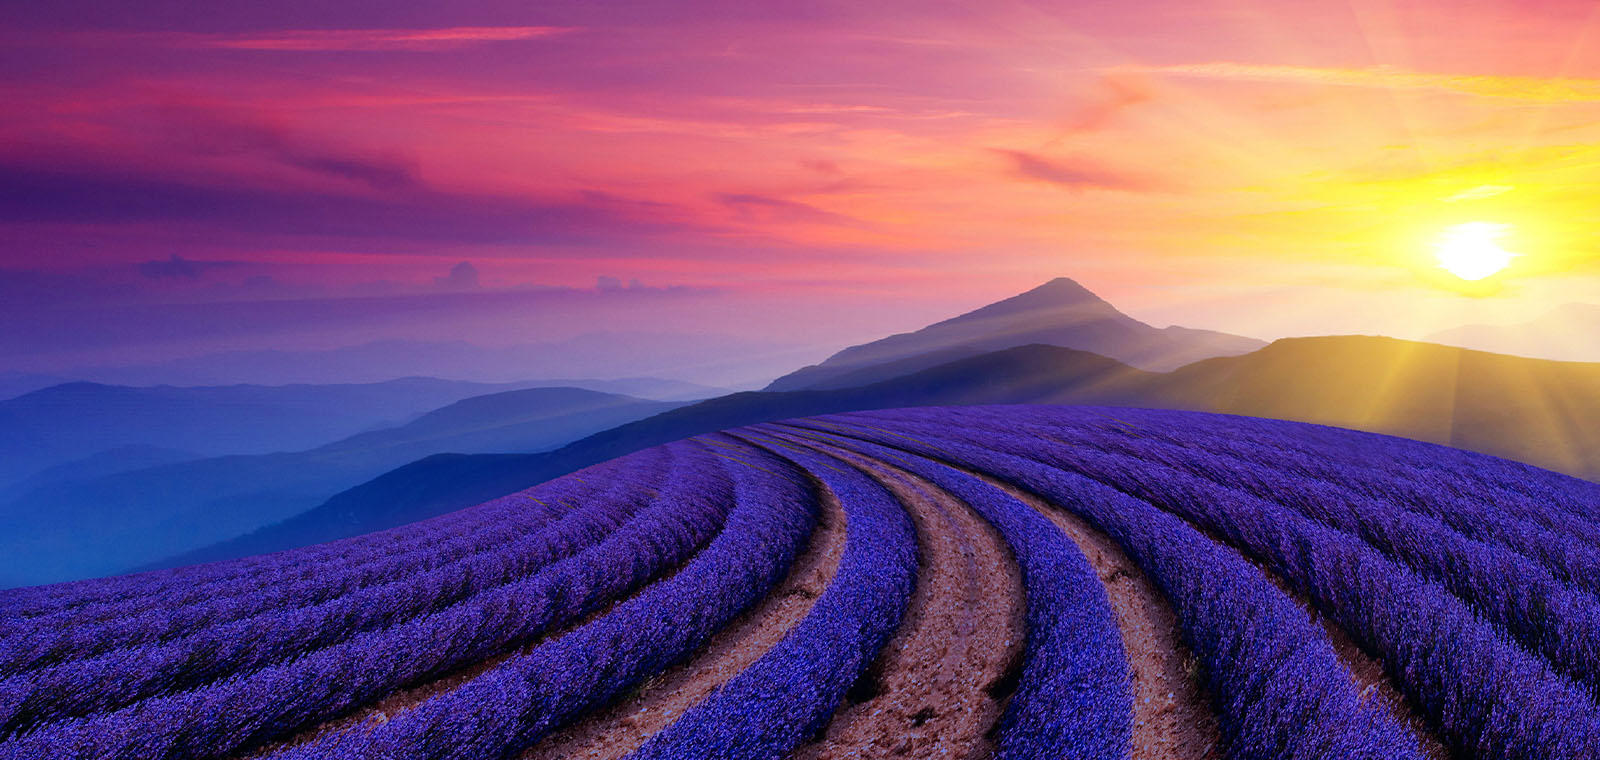 Rows of lavender bushes stretch into the distance, curving at the horizon toward a mountain range under a purple-red sky.